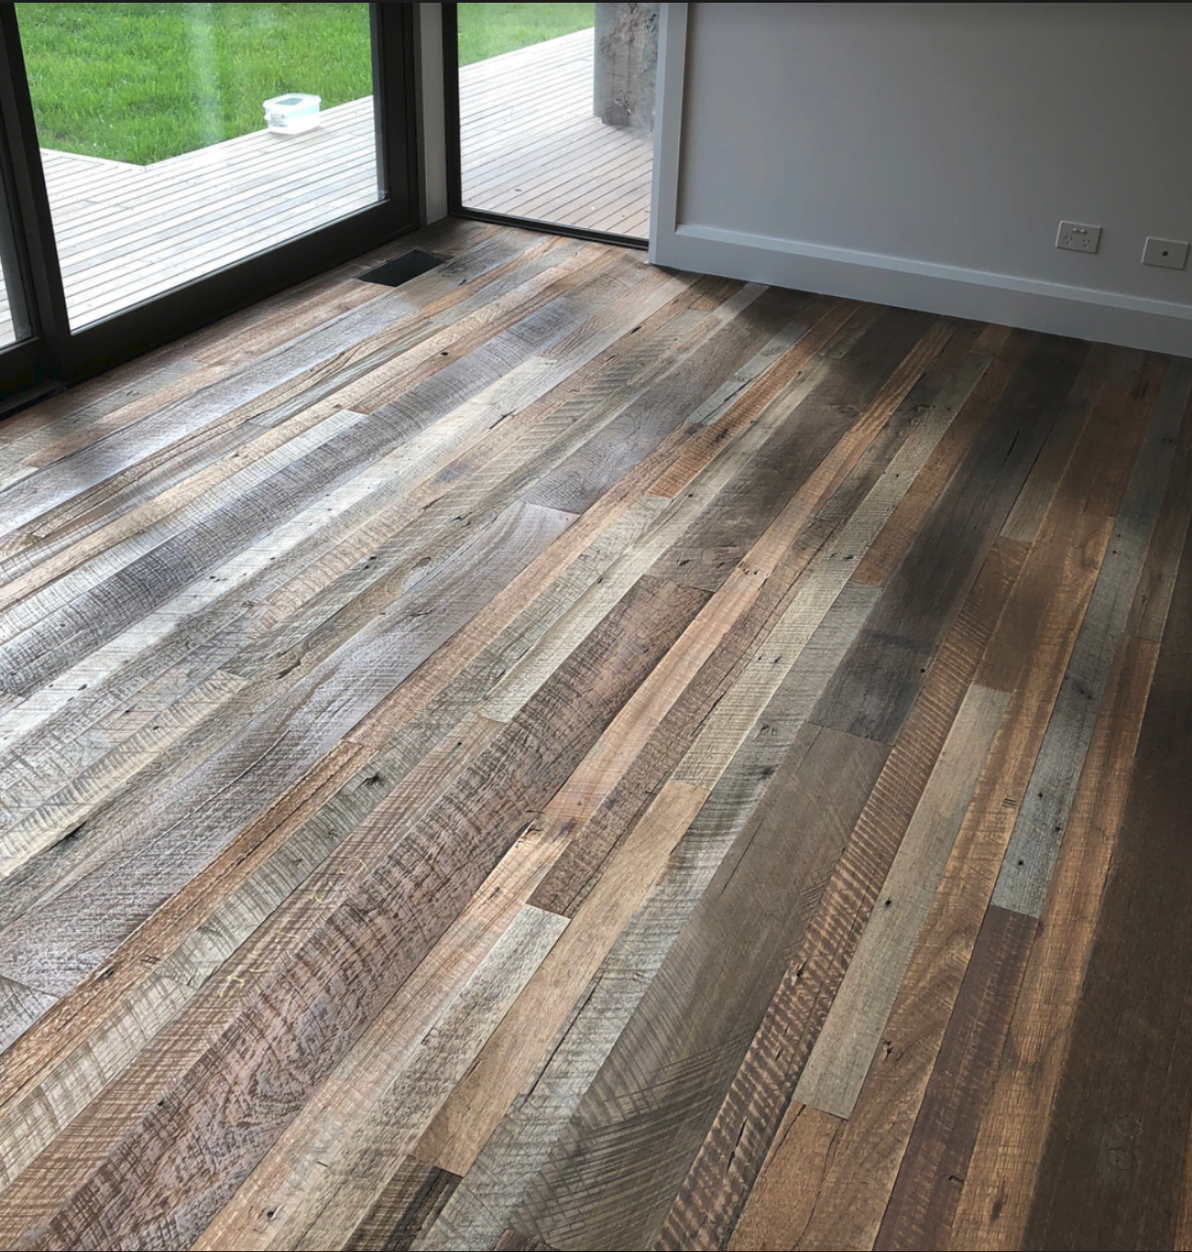 Recycled Timber Flooring | Recycled Floorboards Melbourne